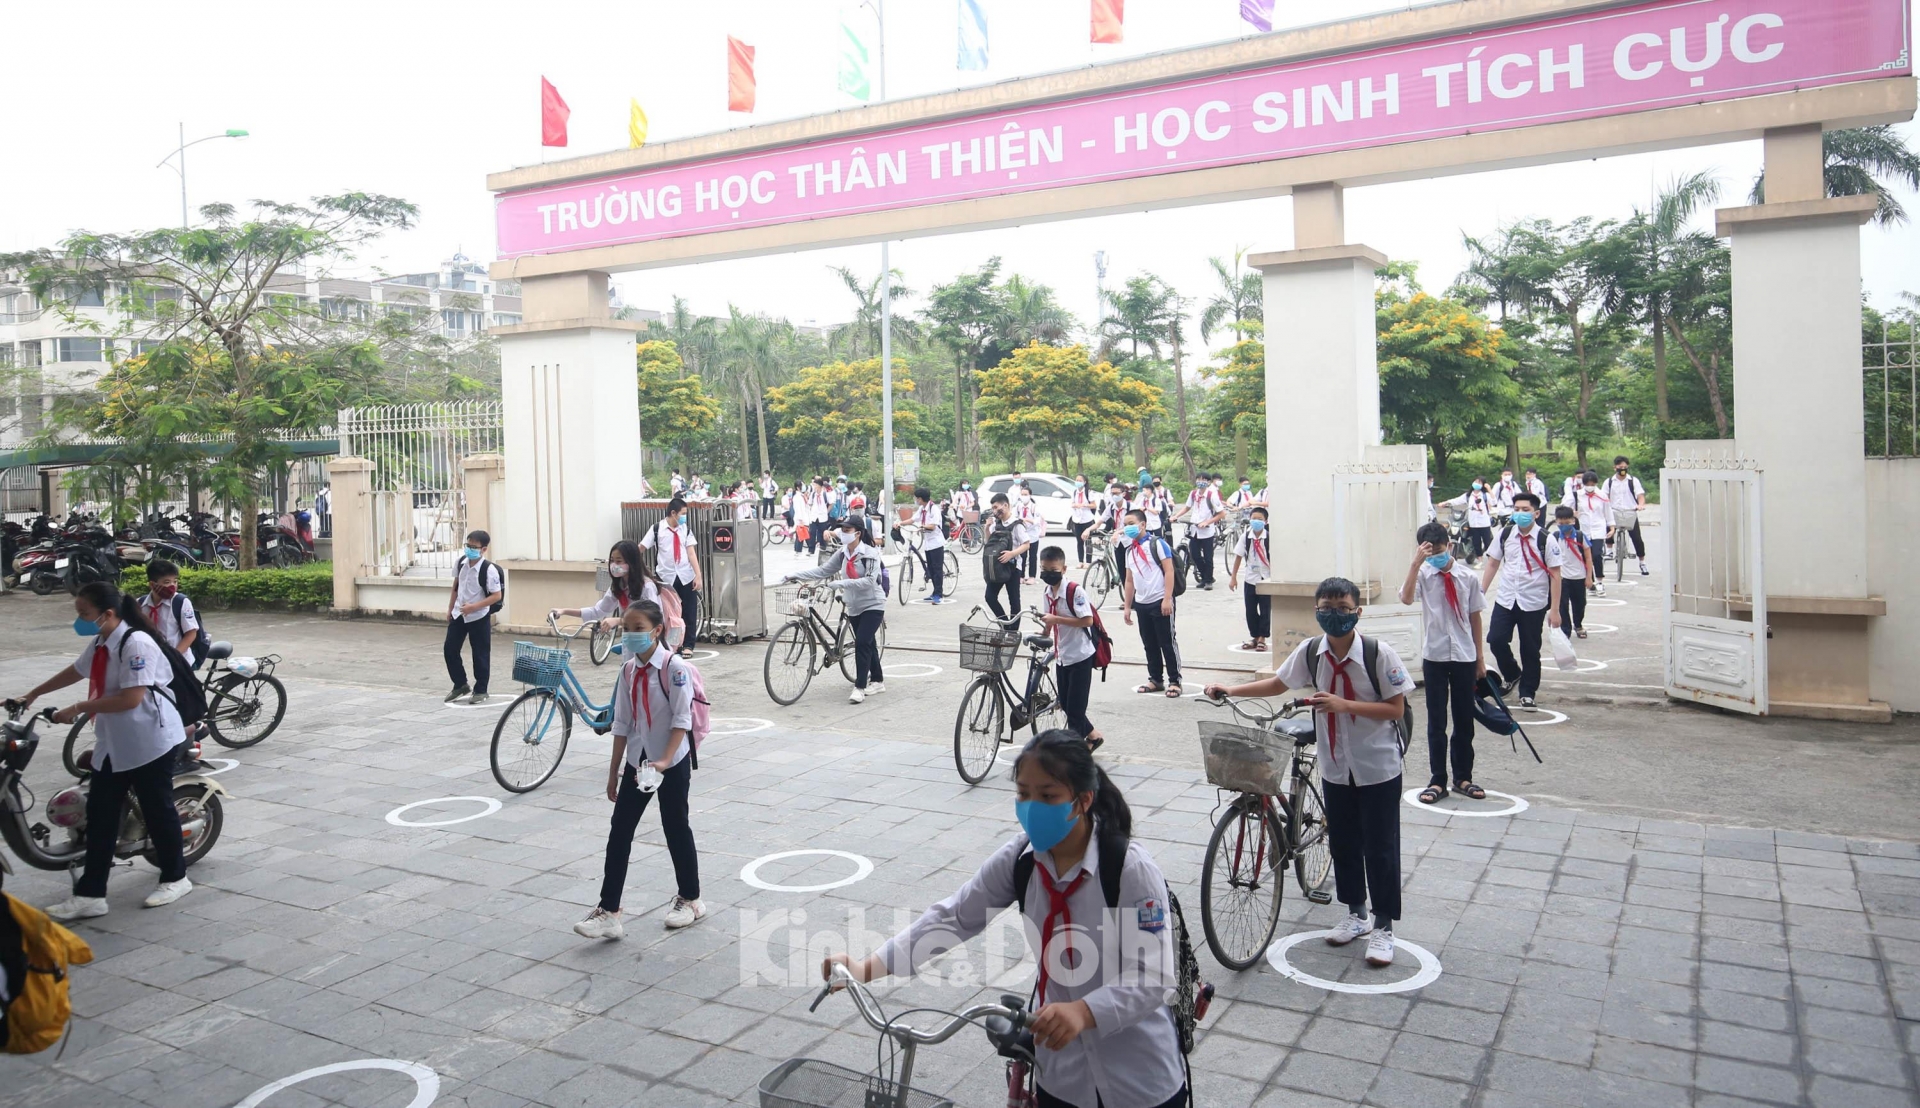 first day of children in hanoi and ho chi minh city to return schools photo story